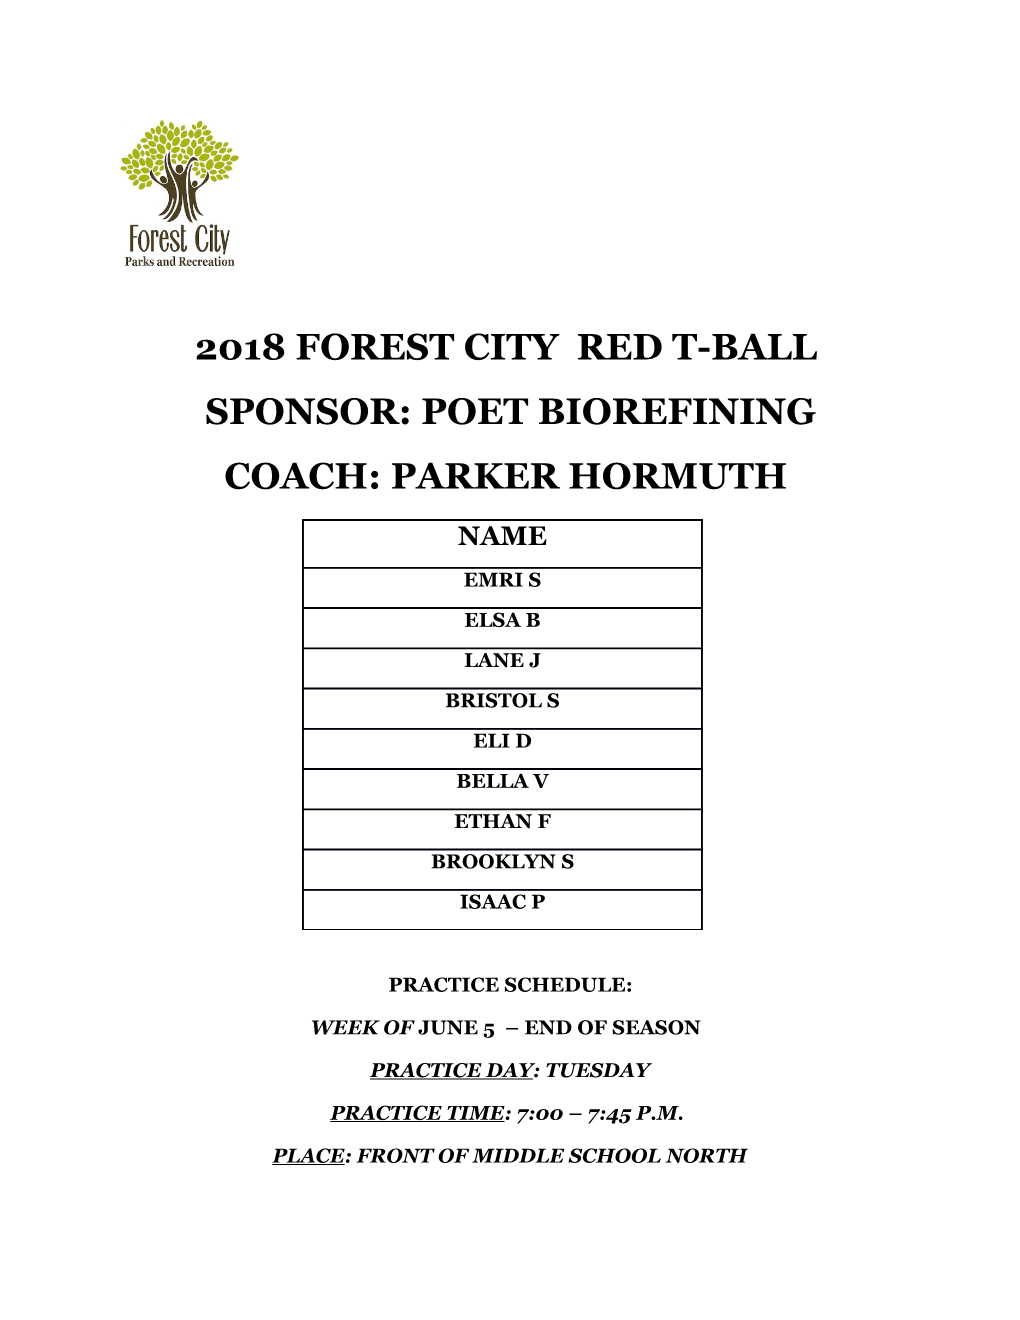 2018 Forest City Red T-Ball